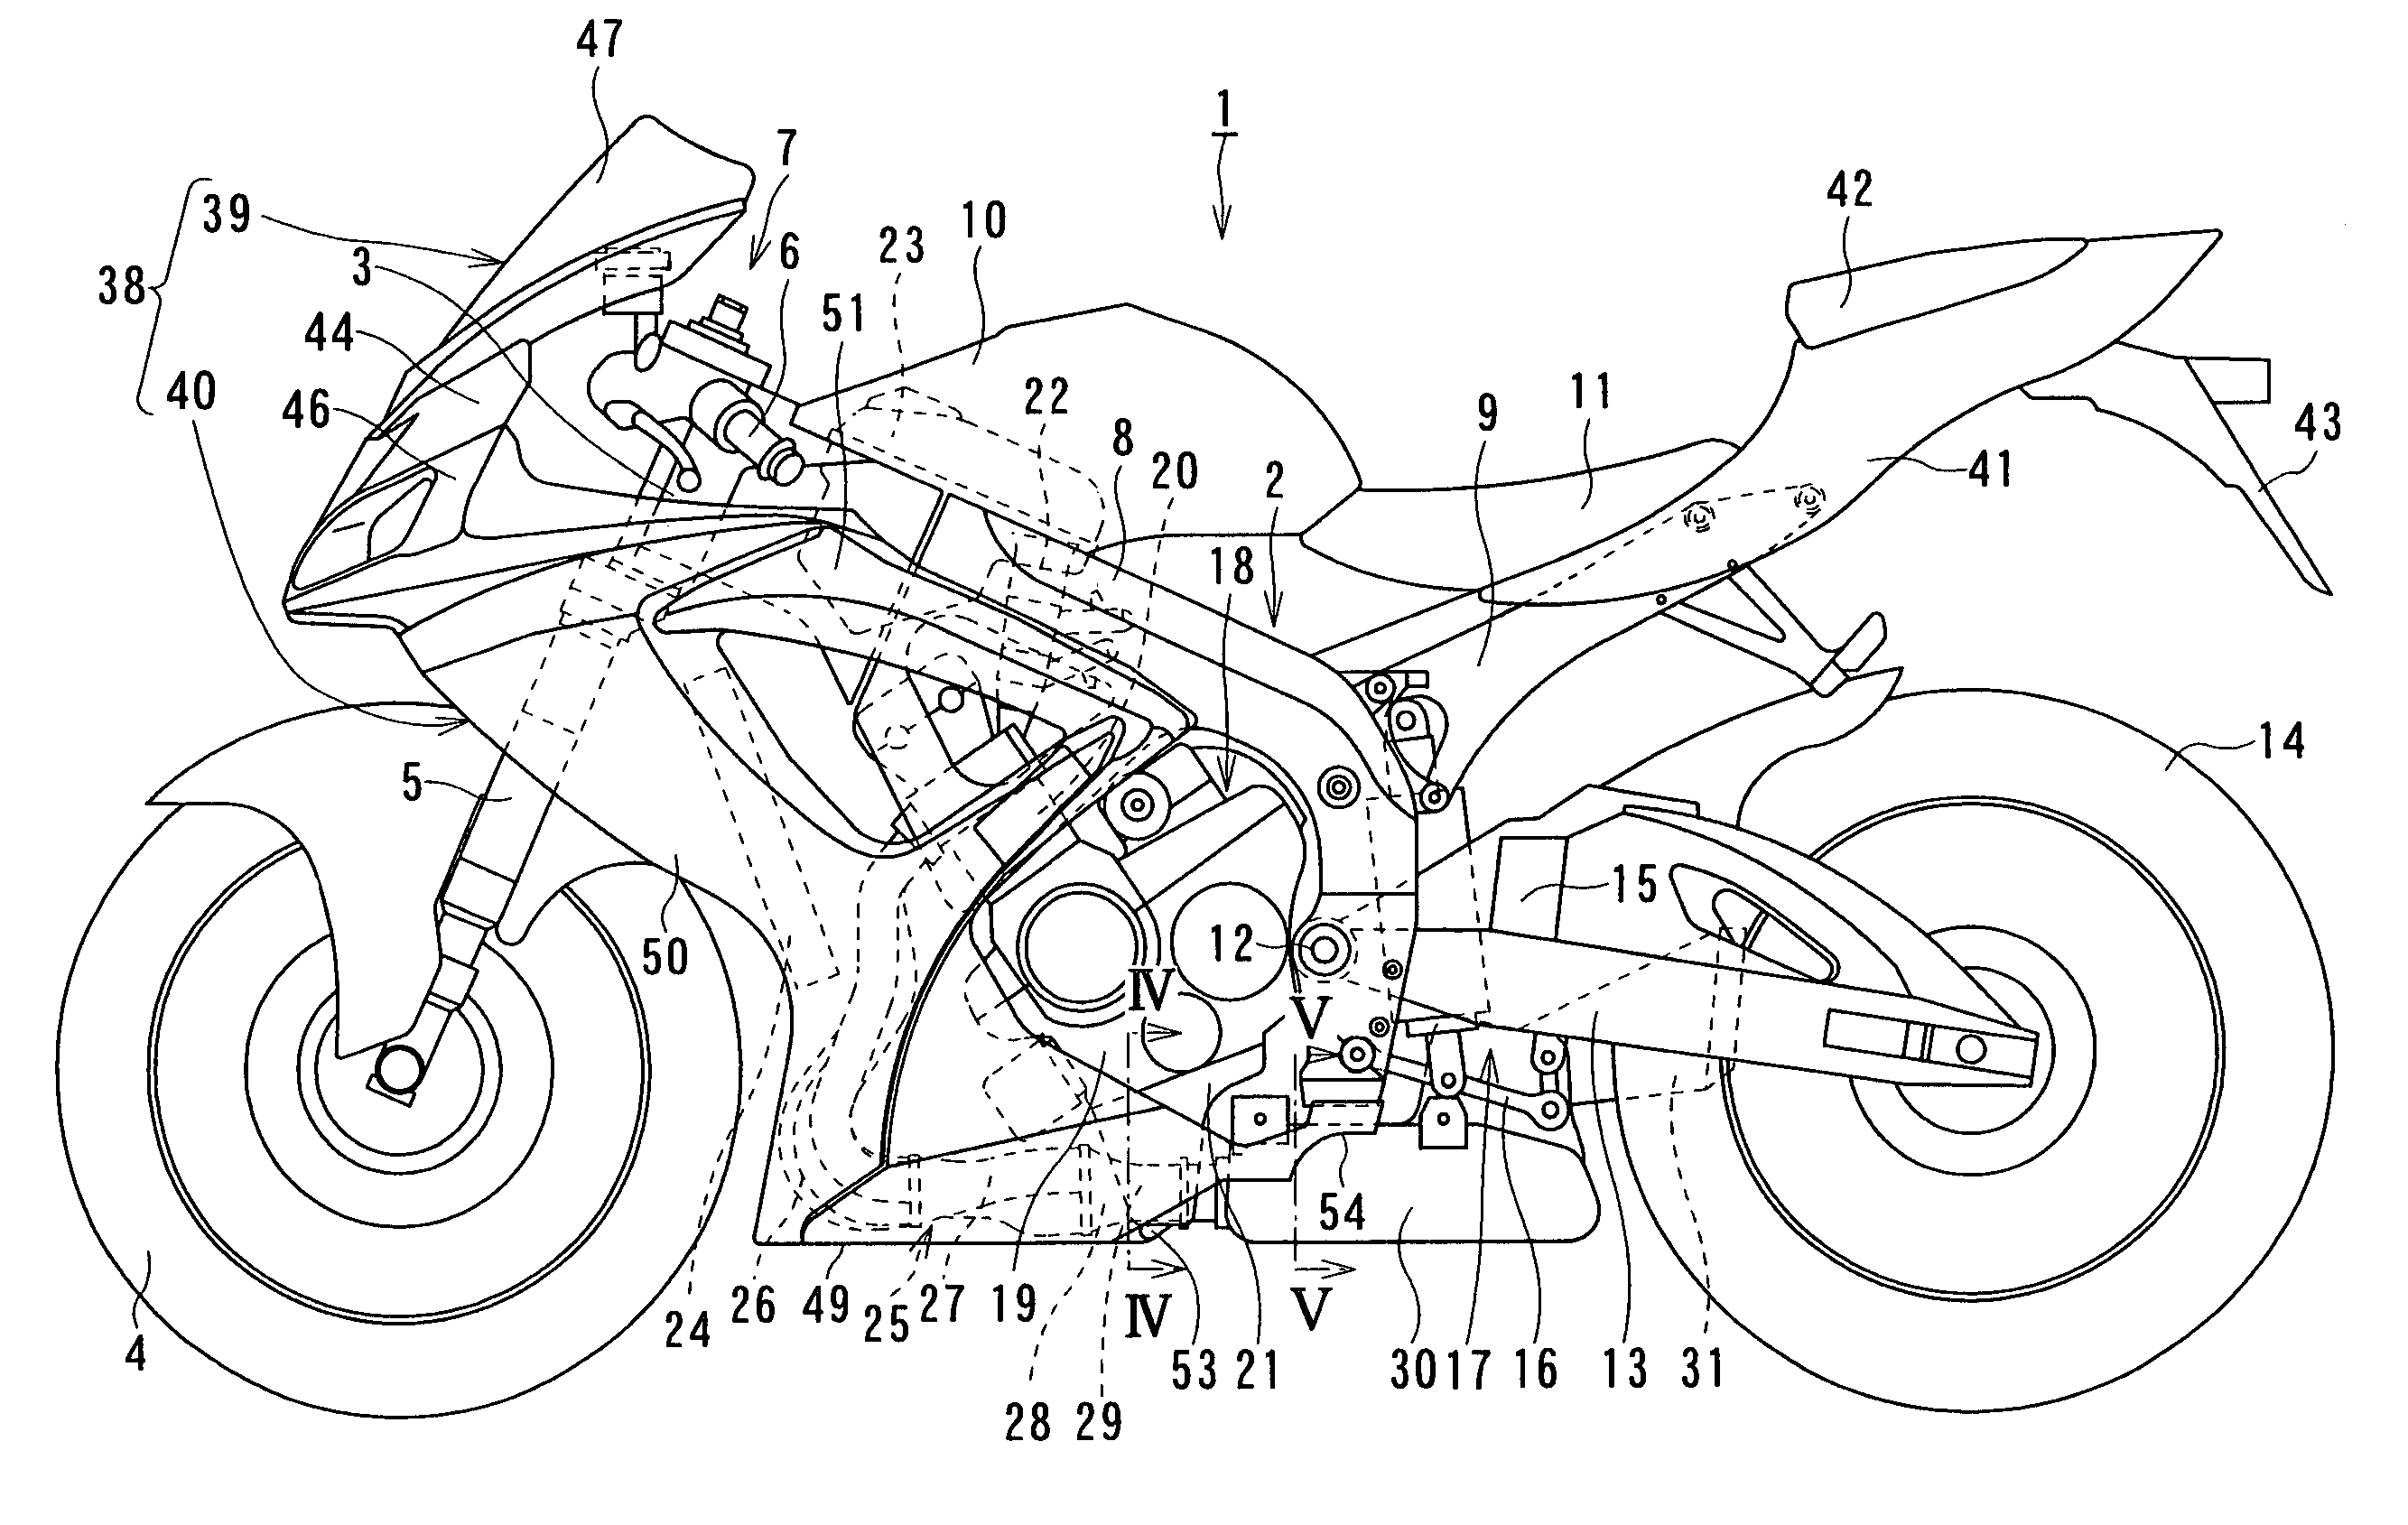 Cowling of motorcycle